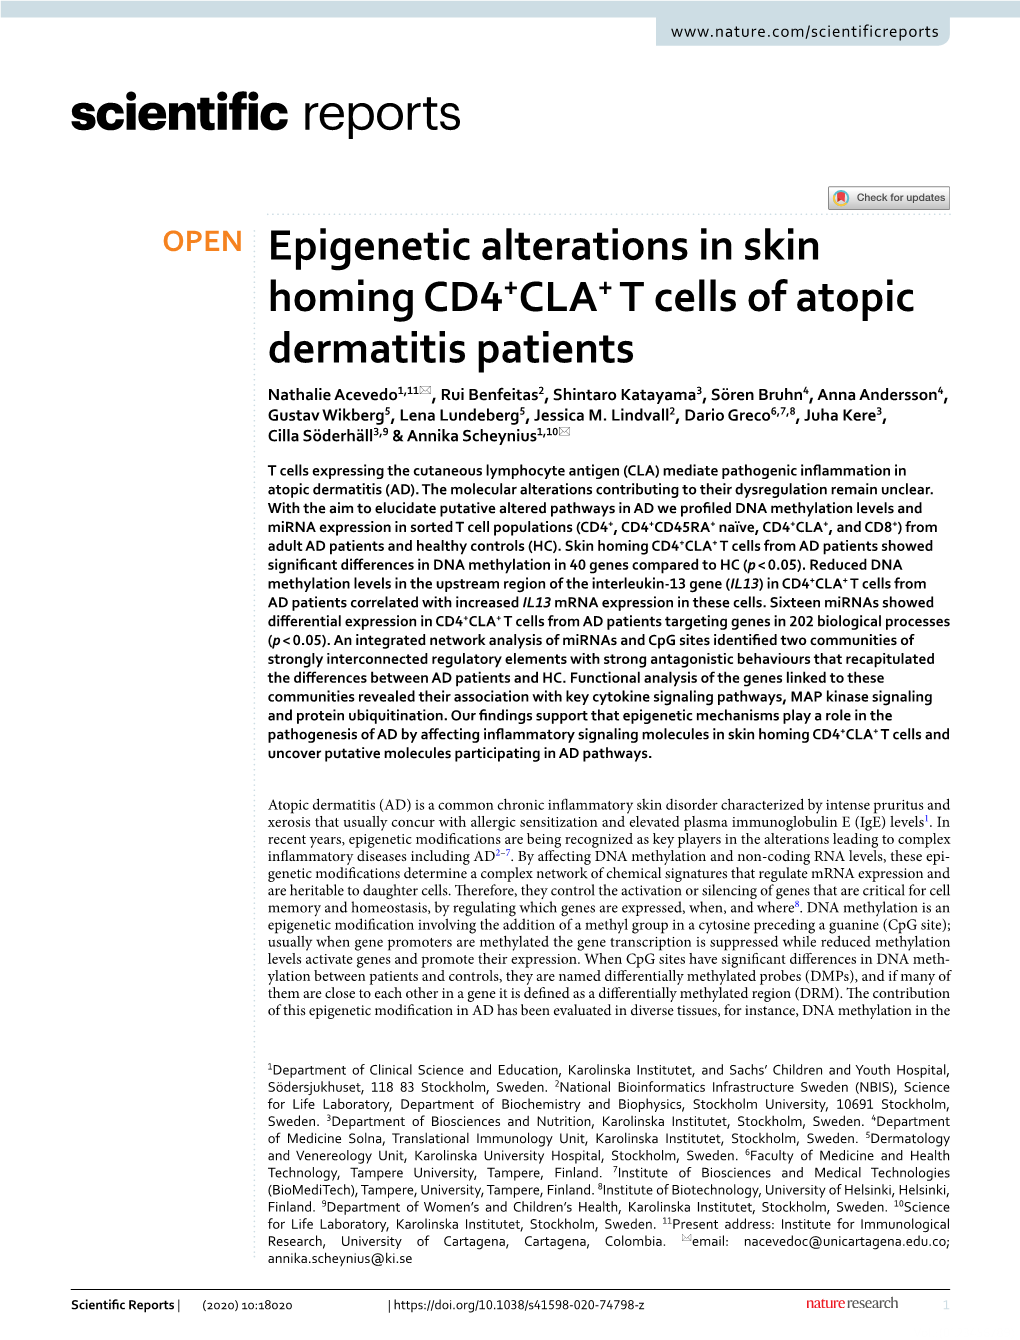 Epigenetic Alterations in Skin Homing CD4+CLA+ T Cells of Atopic